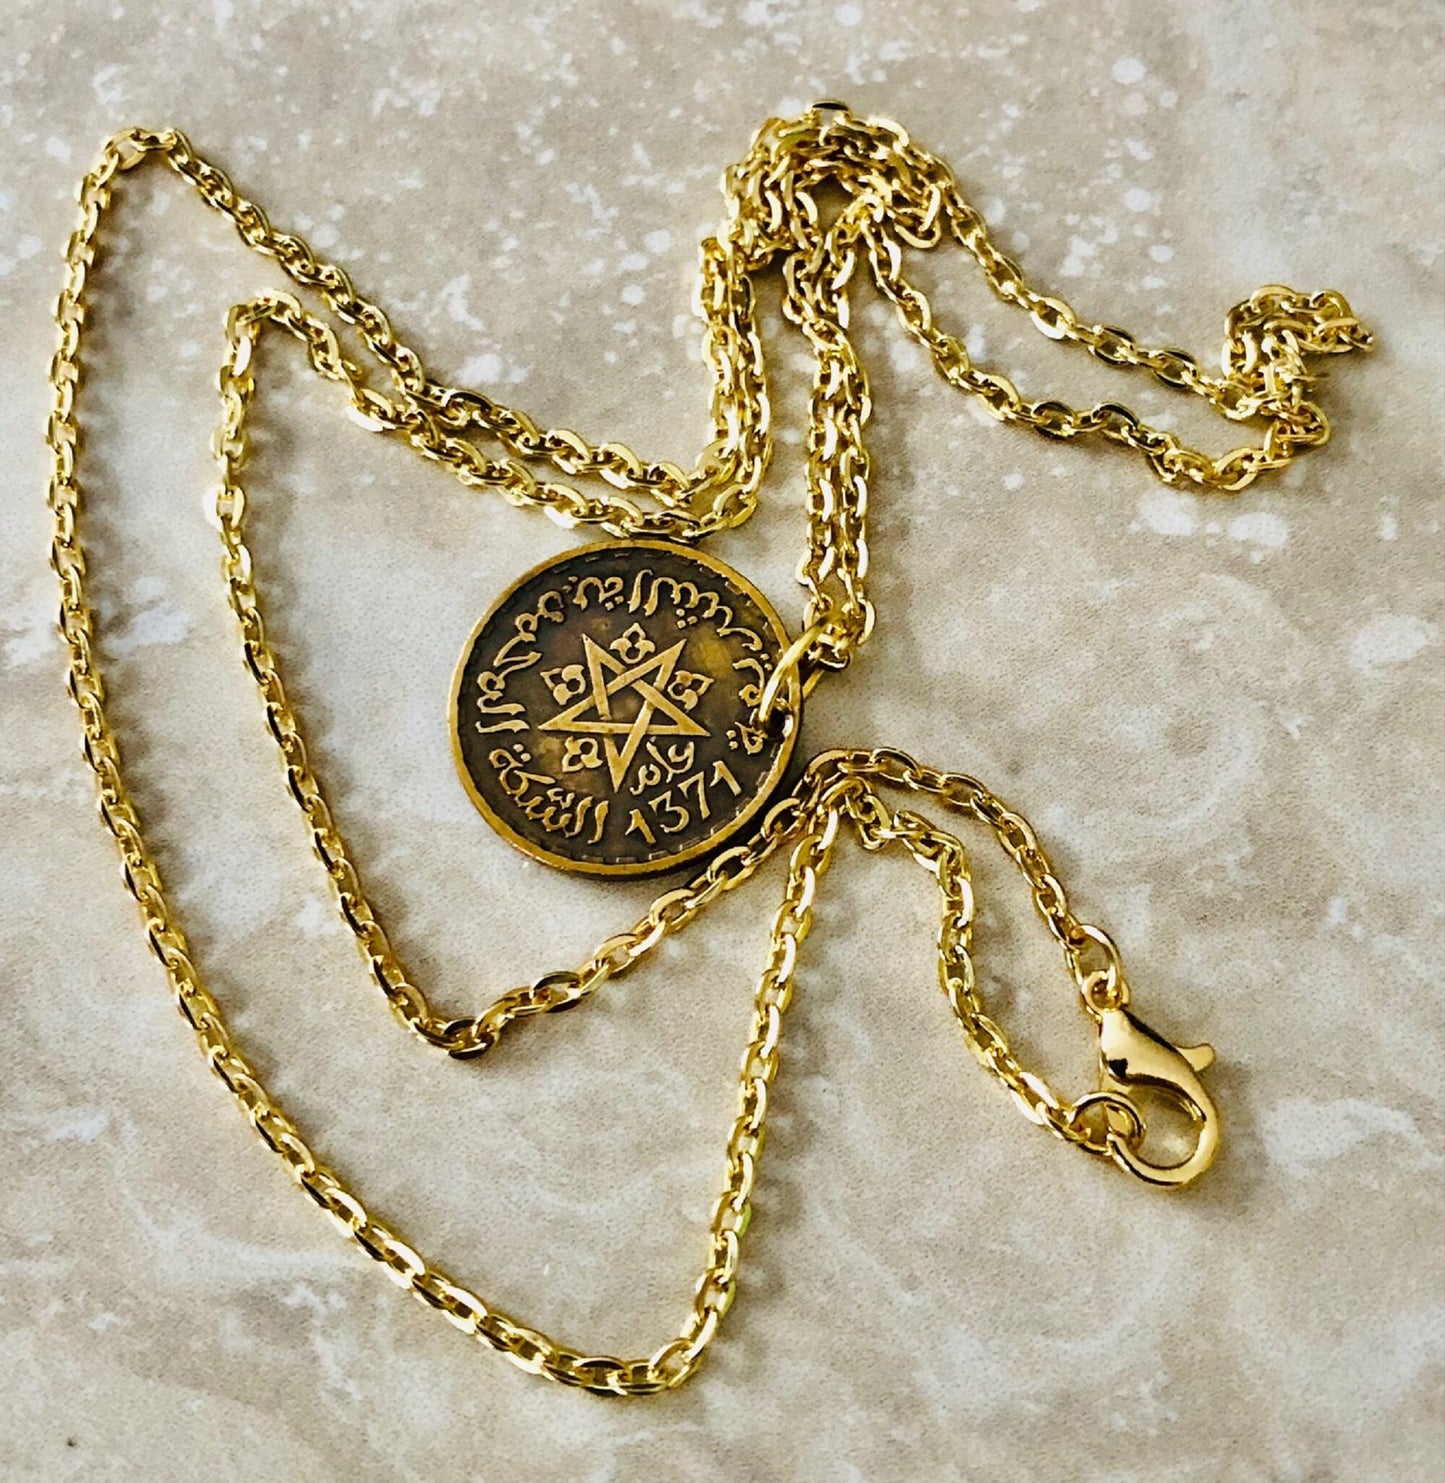 Morocco Coin 10 Francs Moroccan Pendant Personal Necklace Old Vintage Handmade Jewelry Gift Friend Charm For Him Her World Coin Collector